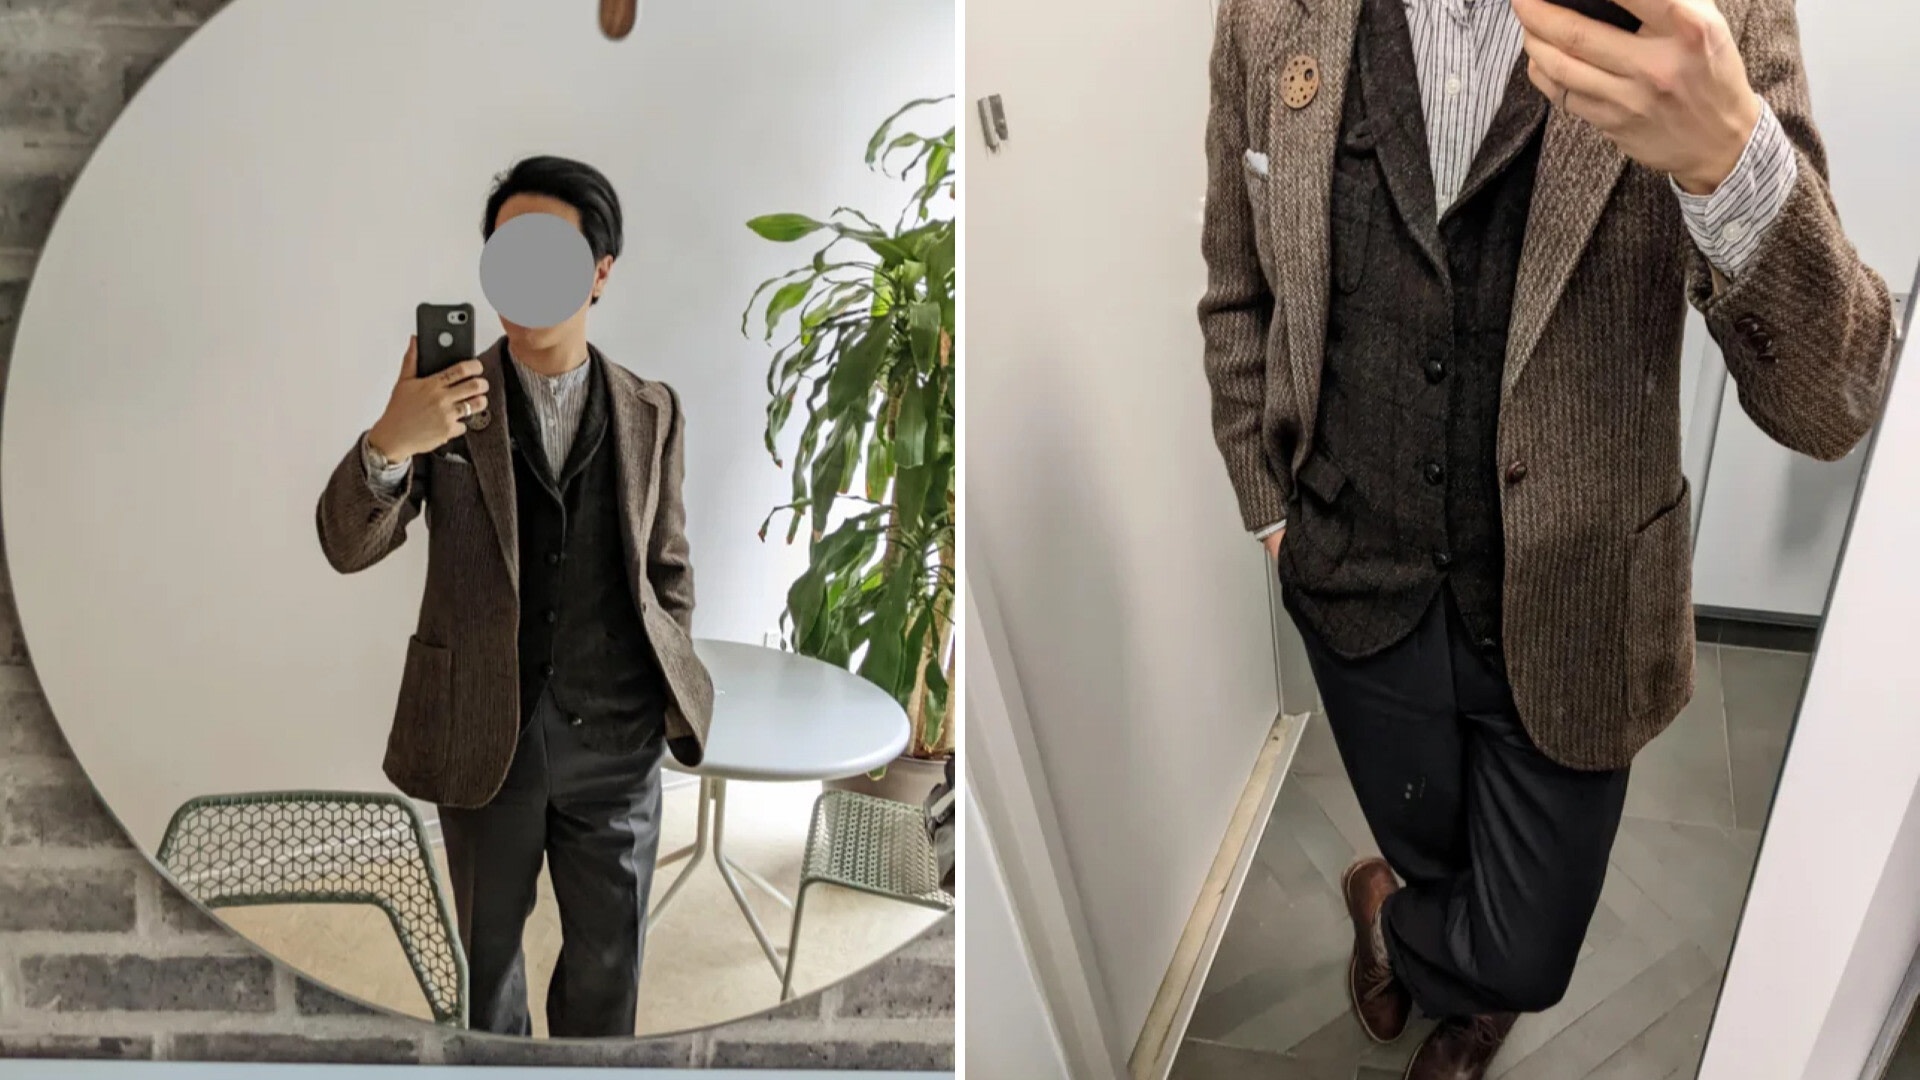 Bargain hunter finds unbelievable 'dapper grandpa' look while browsing their local thrift store: 'What was old is now new'